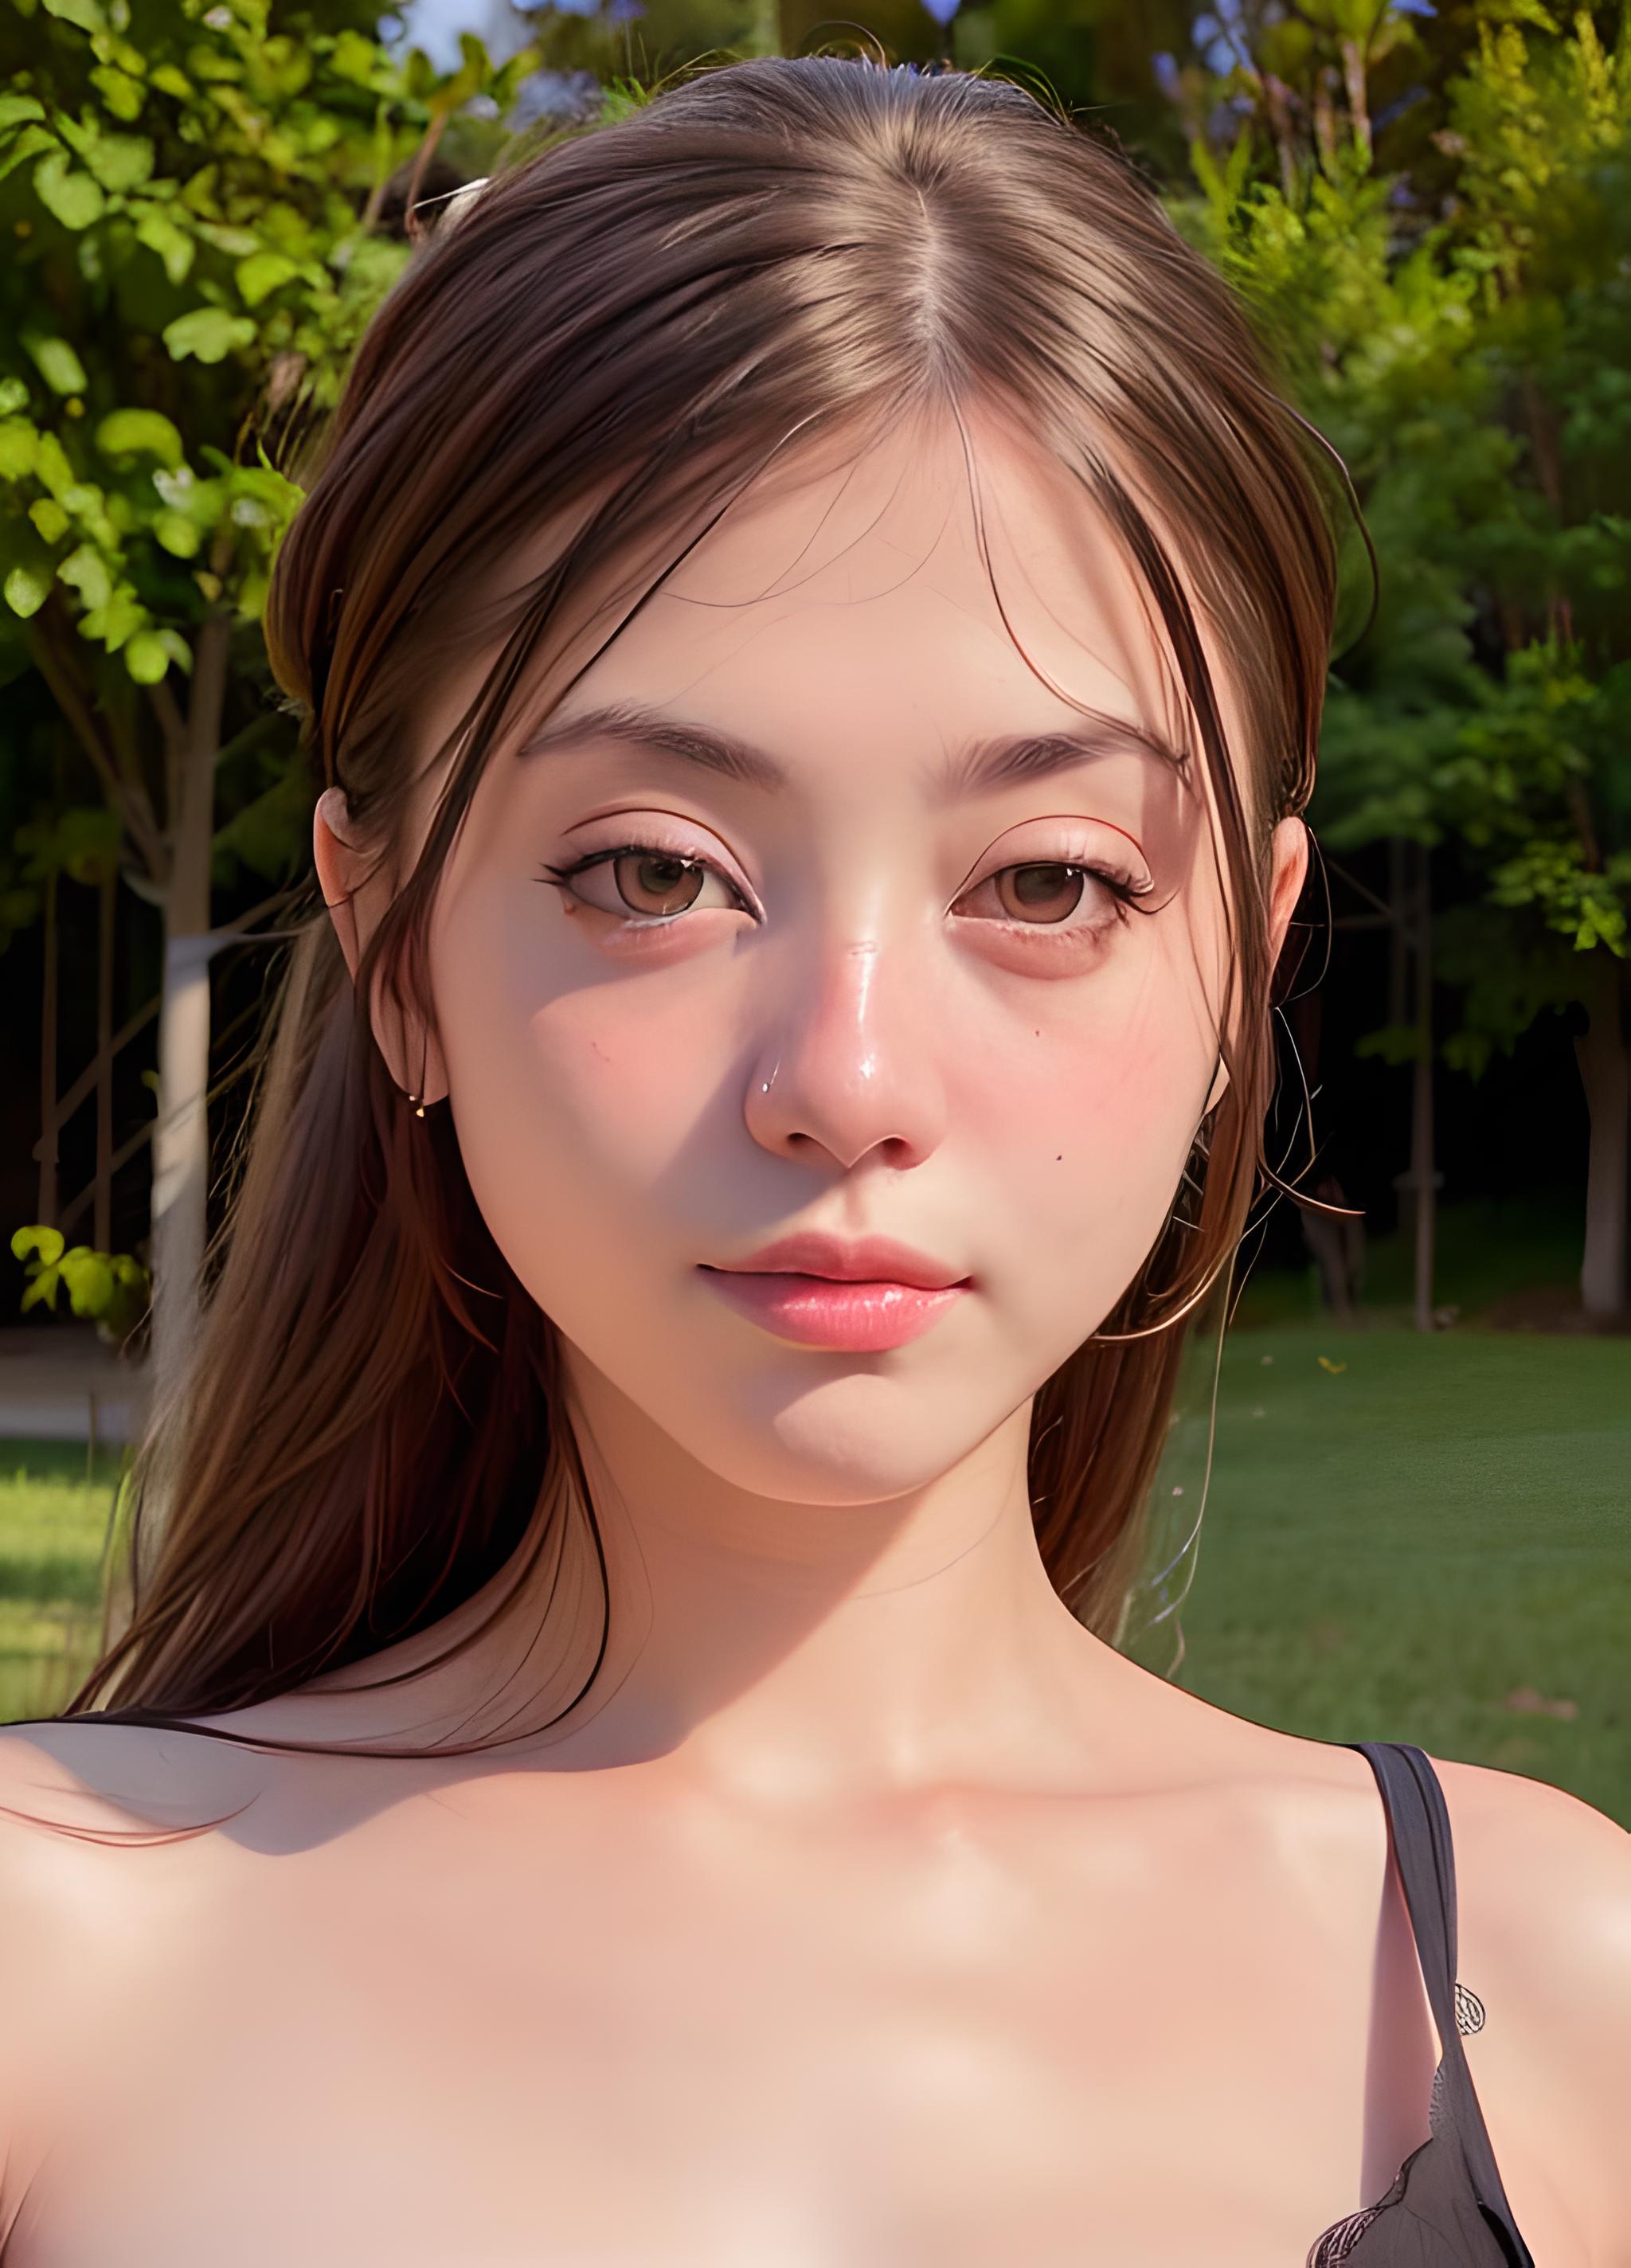 AI model image by wenderinf